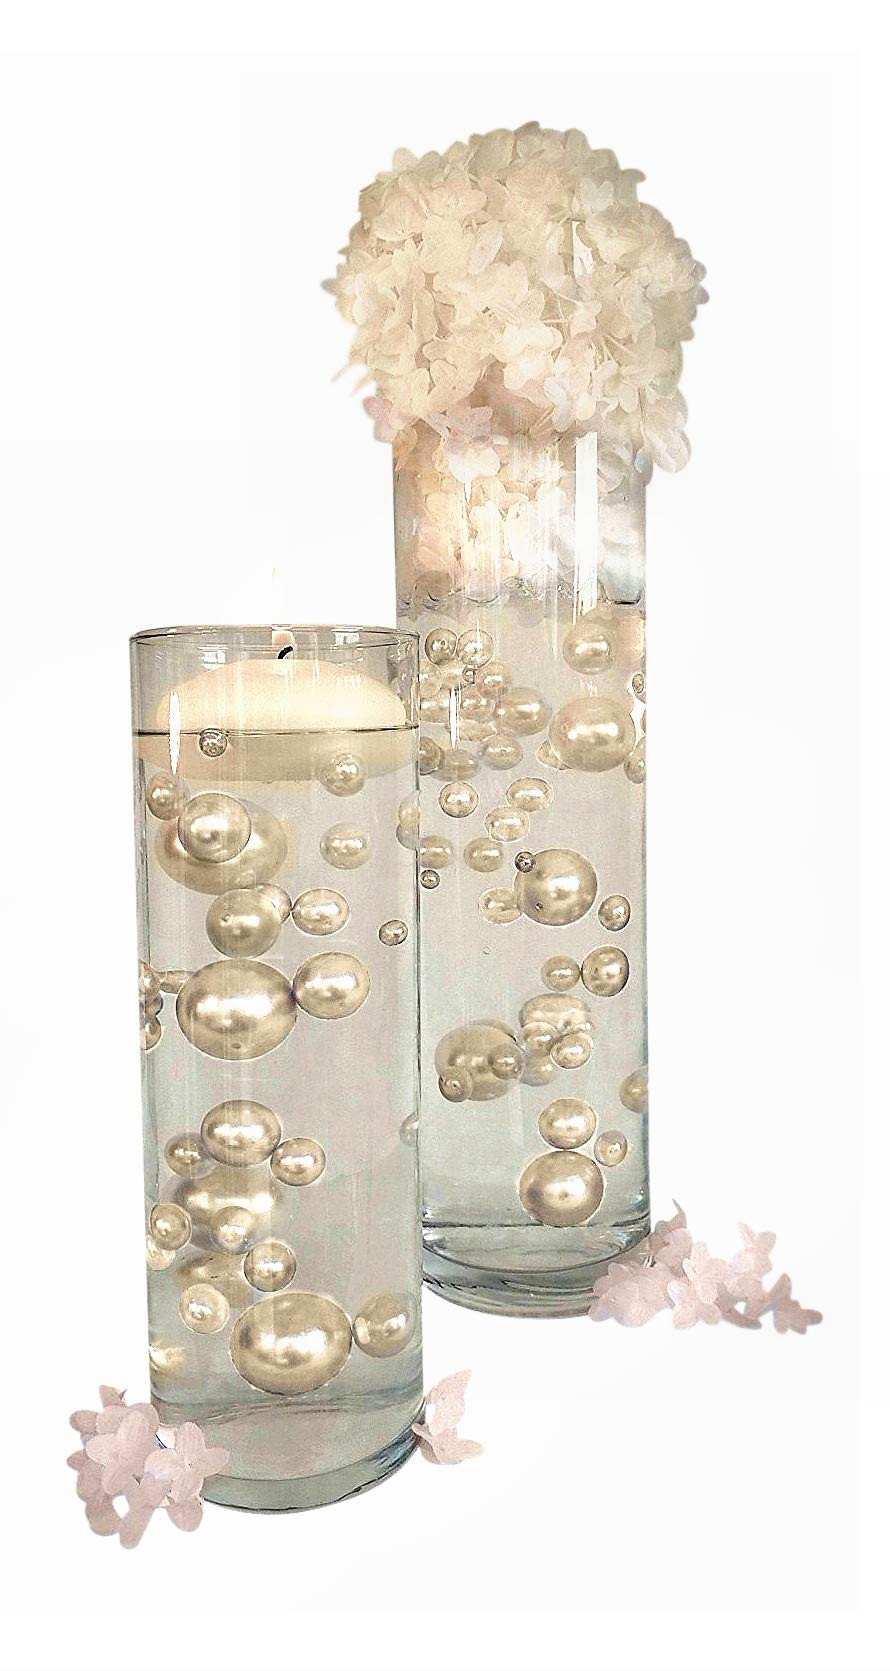 11 Fabulous Clear Gel Vase Filler 2024 free download clear gel vase filler of best floating pearls for centerpieces amazon com for floating no hole ivory pearls jumbo assorted sizes vase fillers for centerpieces decorations includes transparen